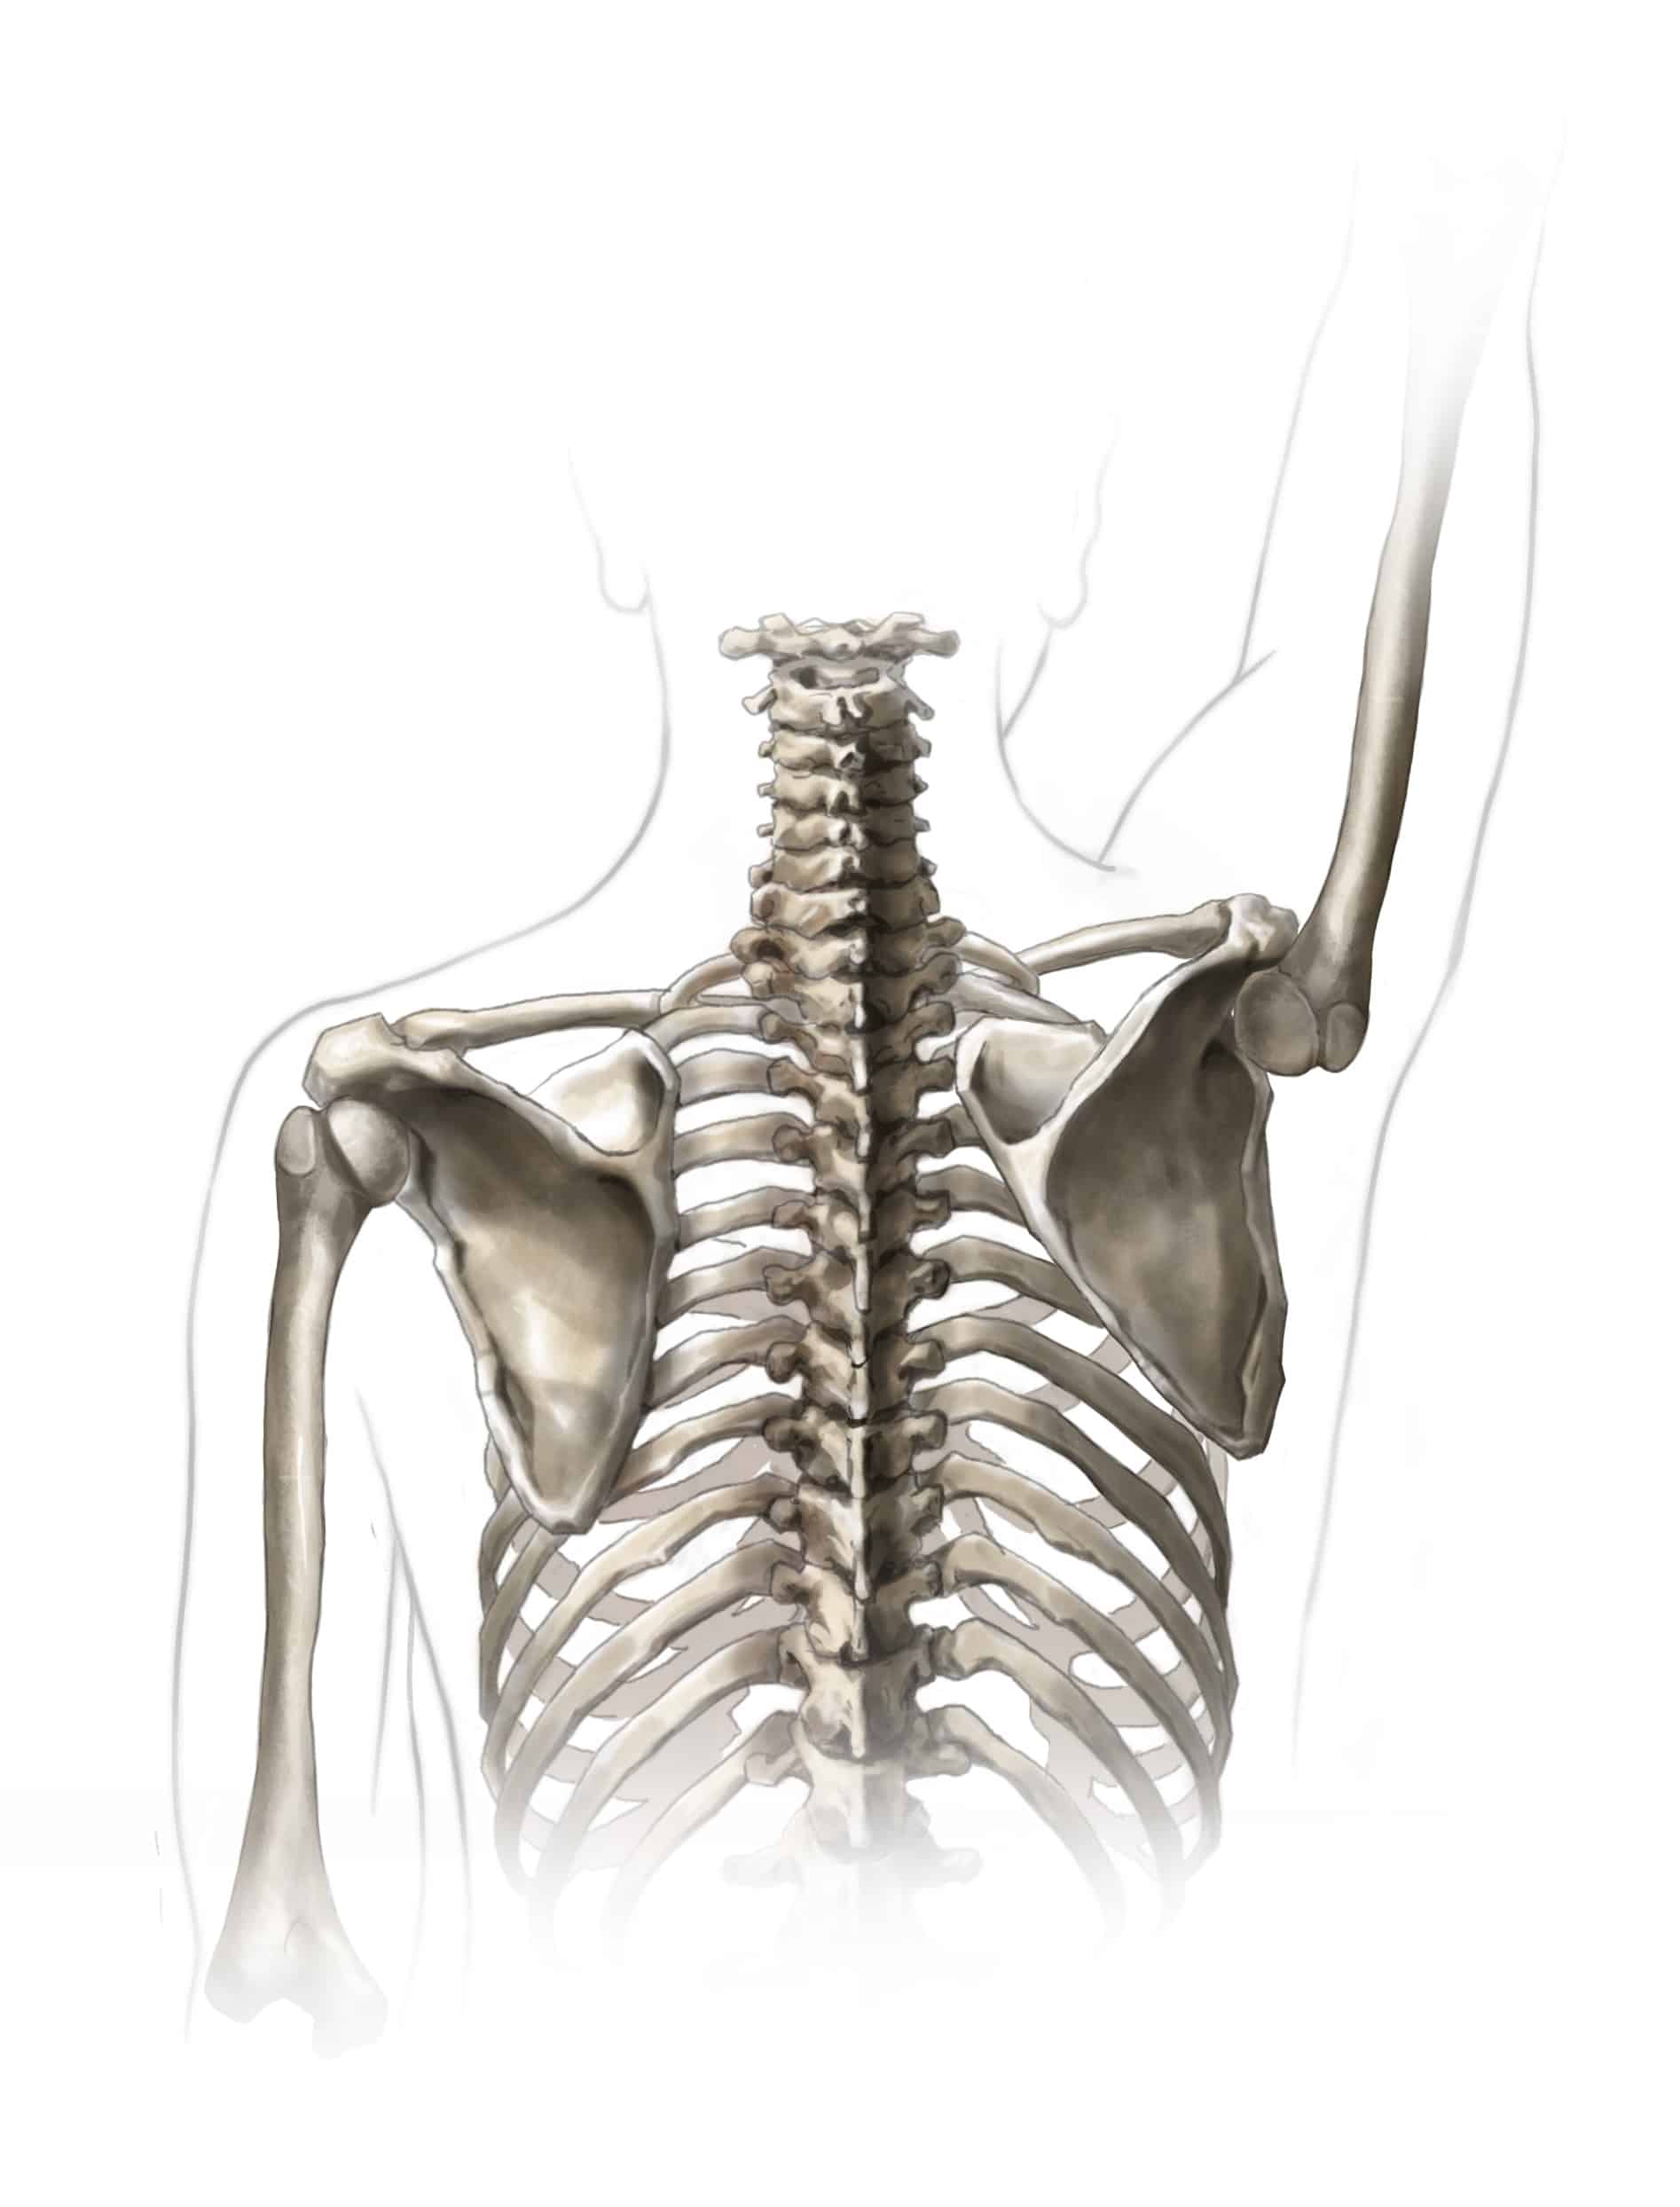 Why Rotator Cuff Exercises Won’t Fix Your Shoulder Pain